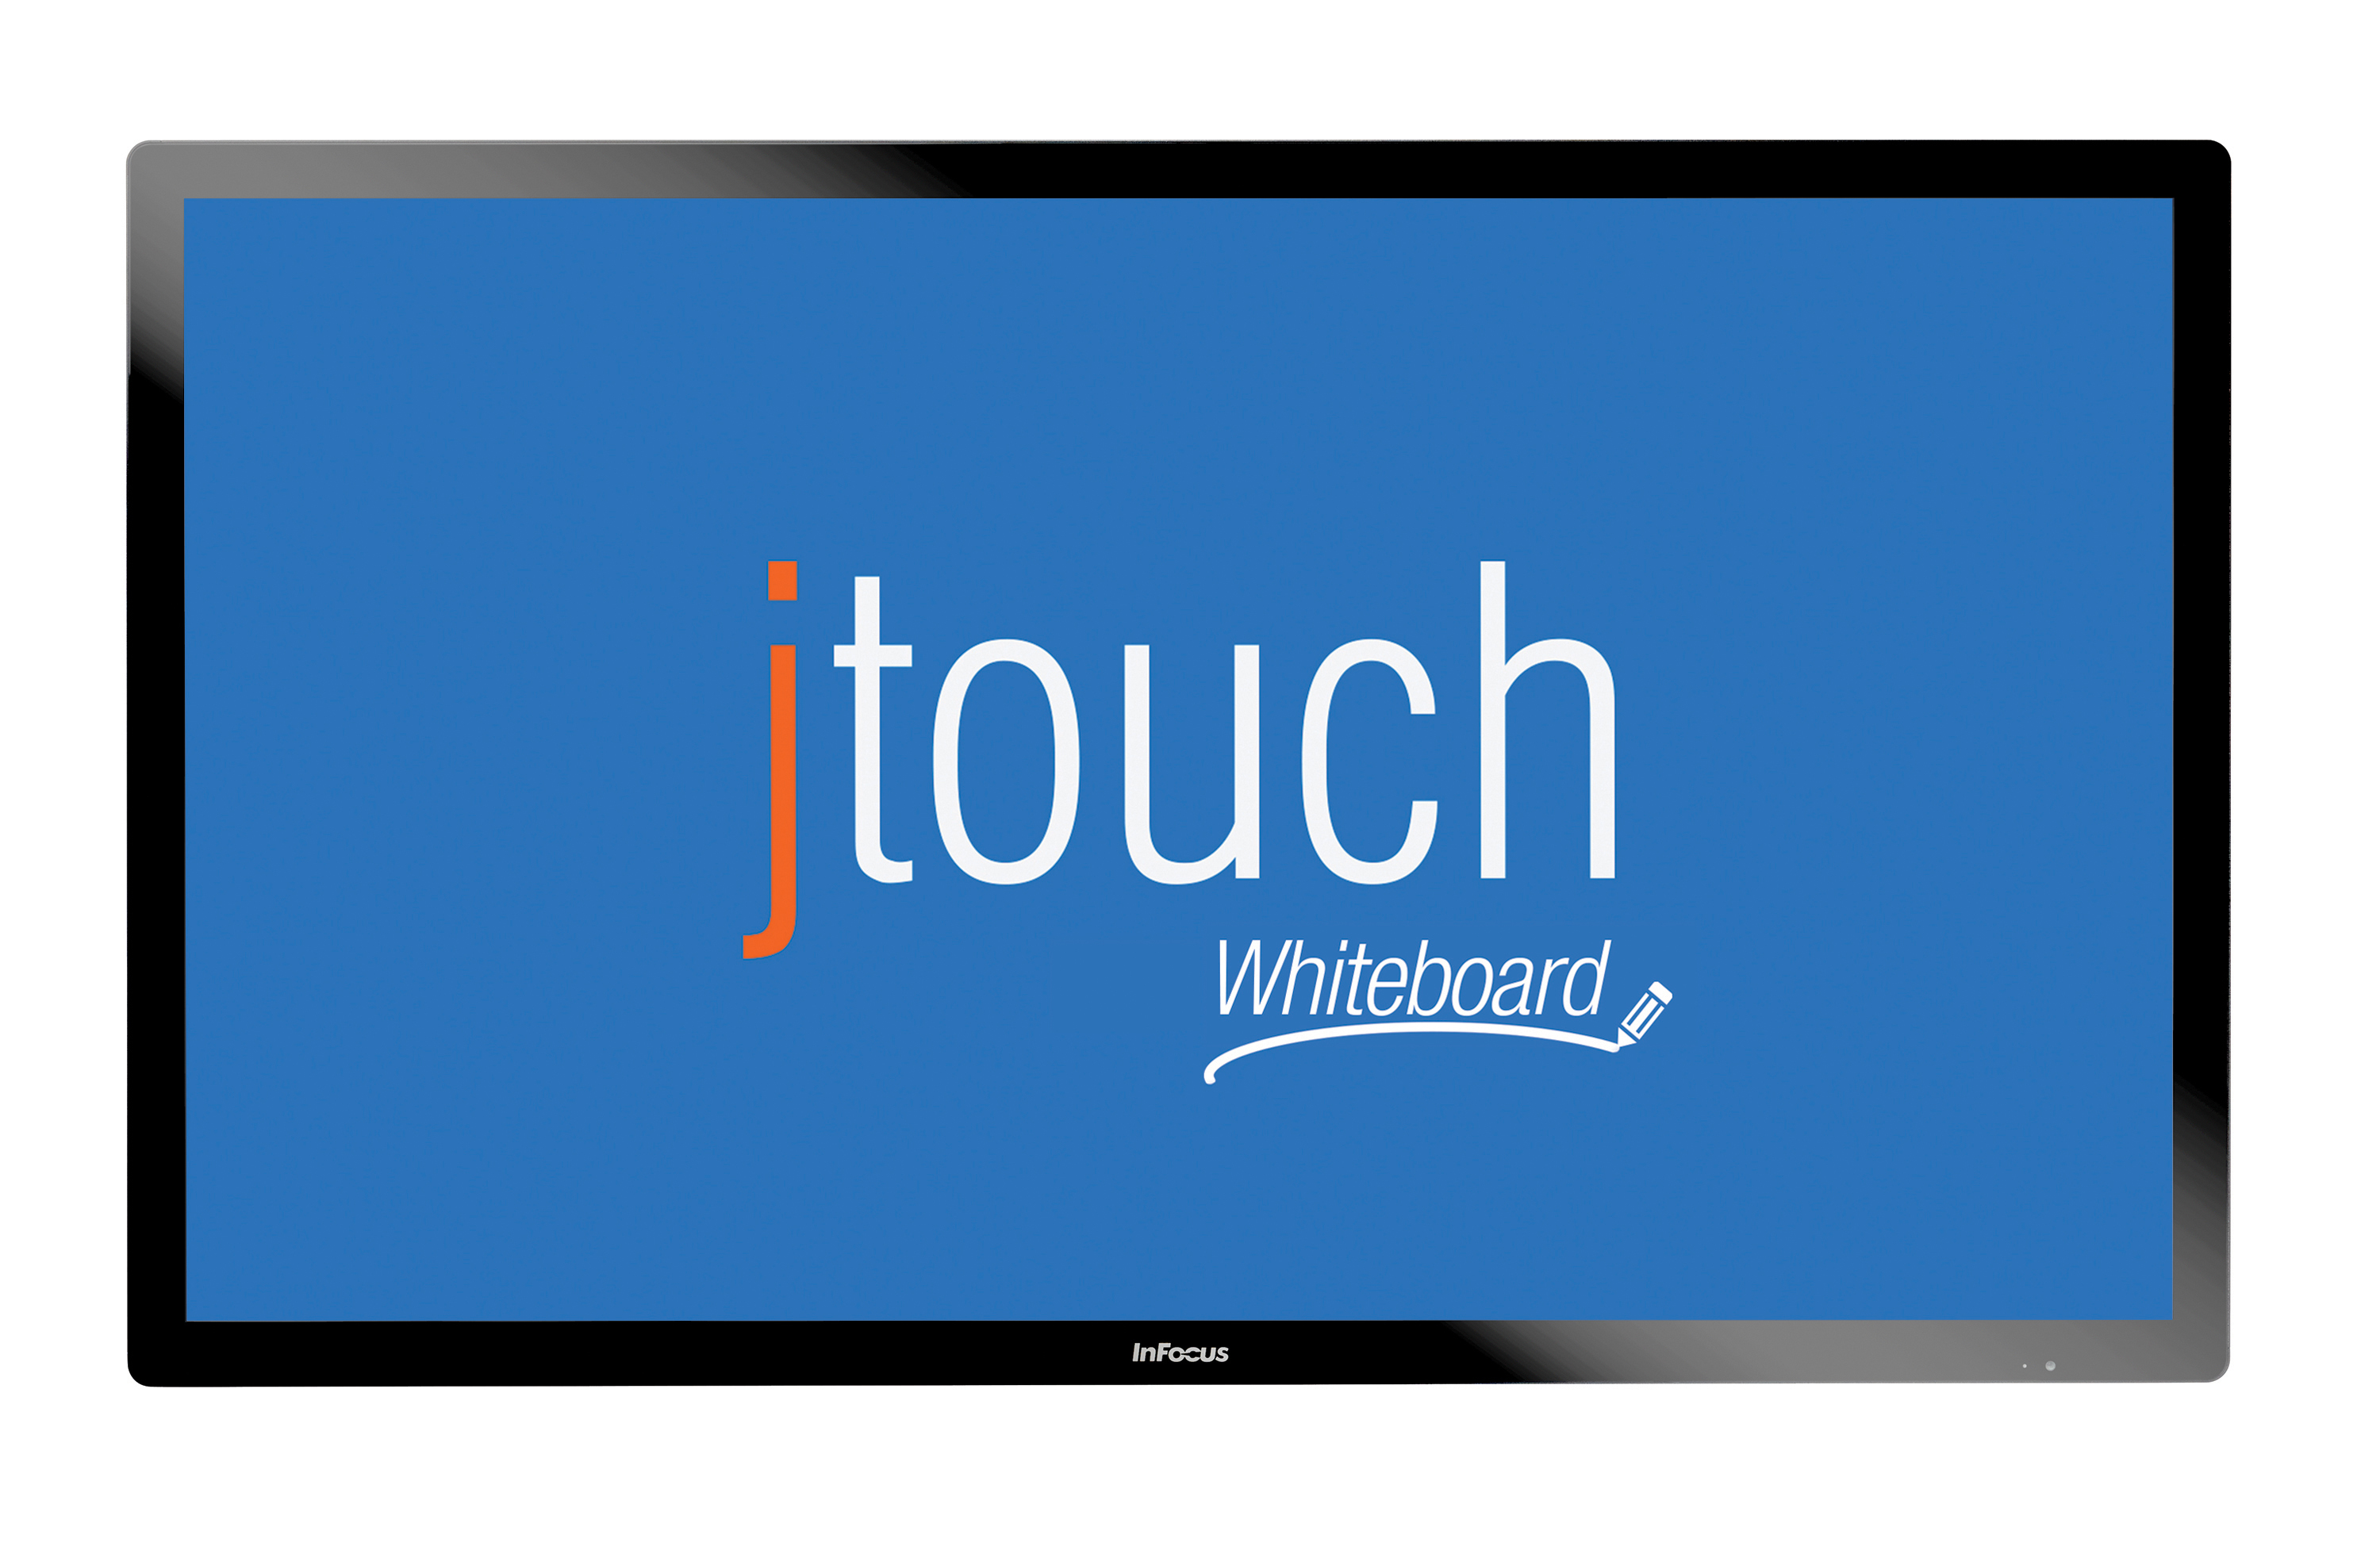 InFocus JTouch INF6502WBAGP JTOUCH-Series - 65" LED display - image 2 of 2